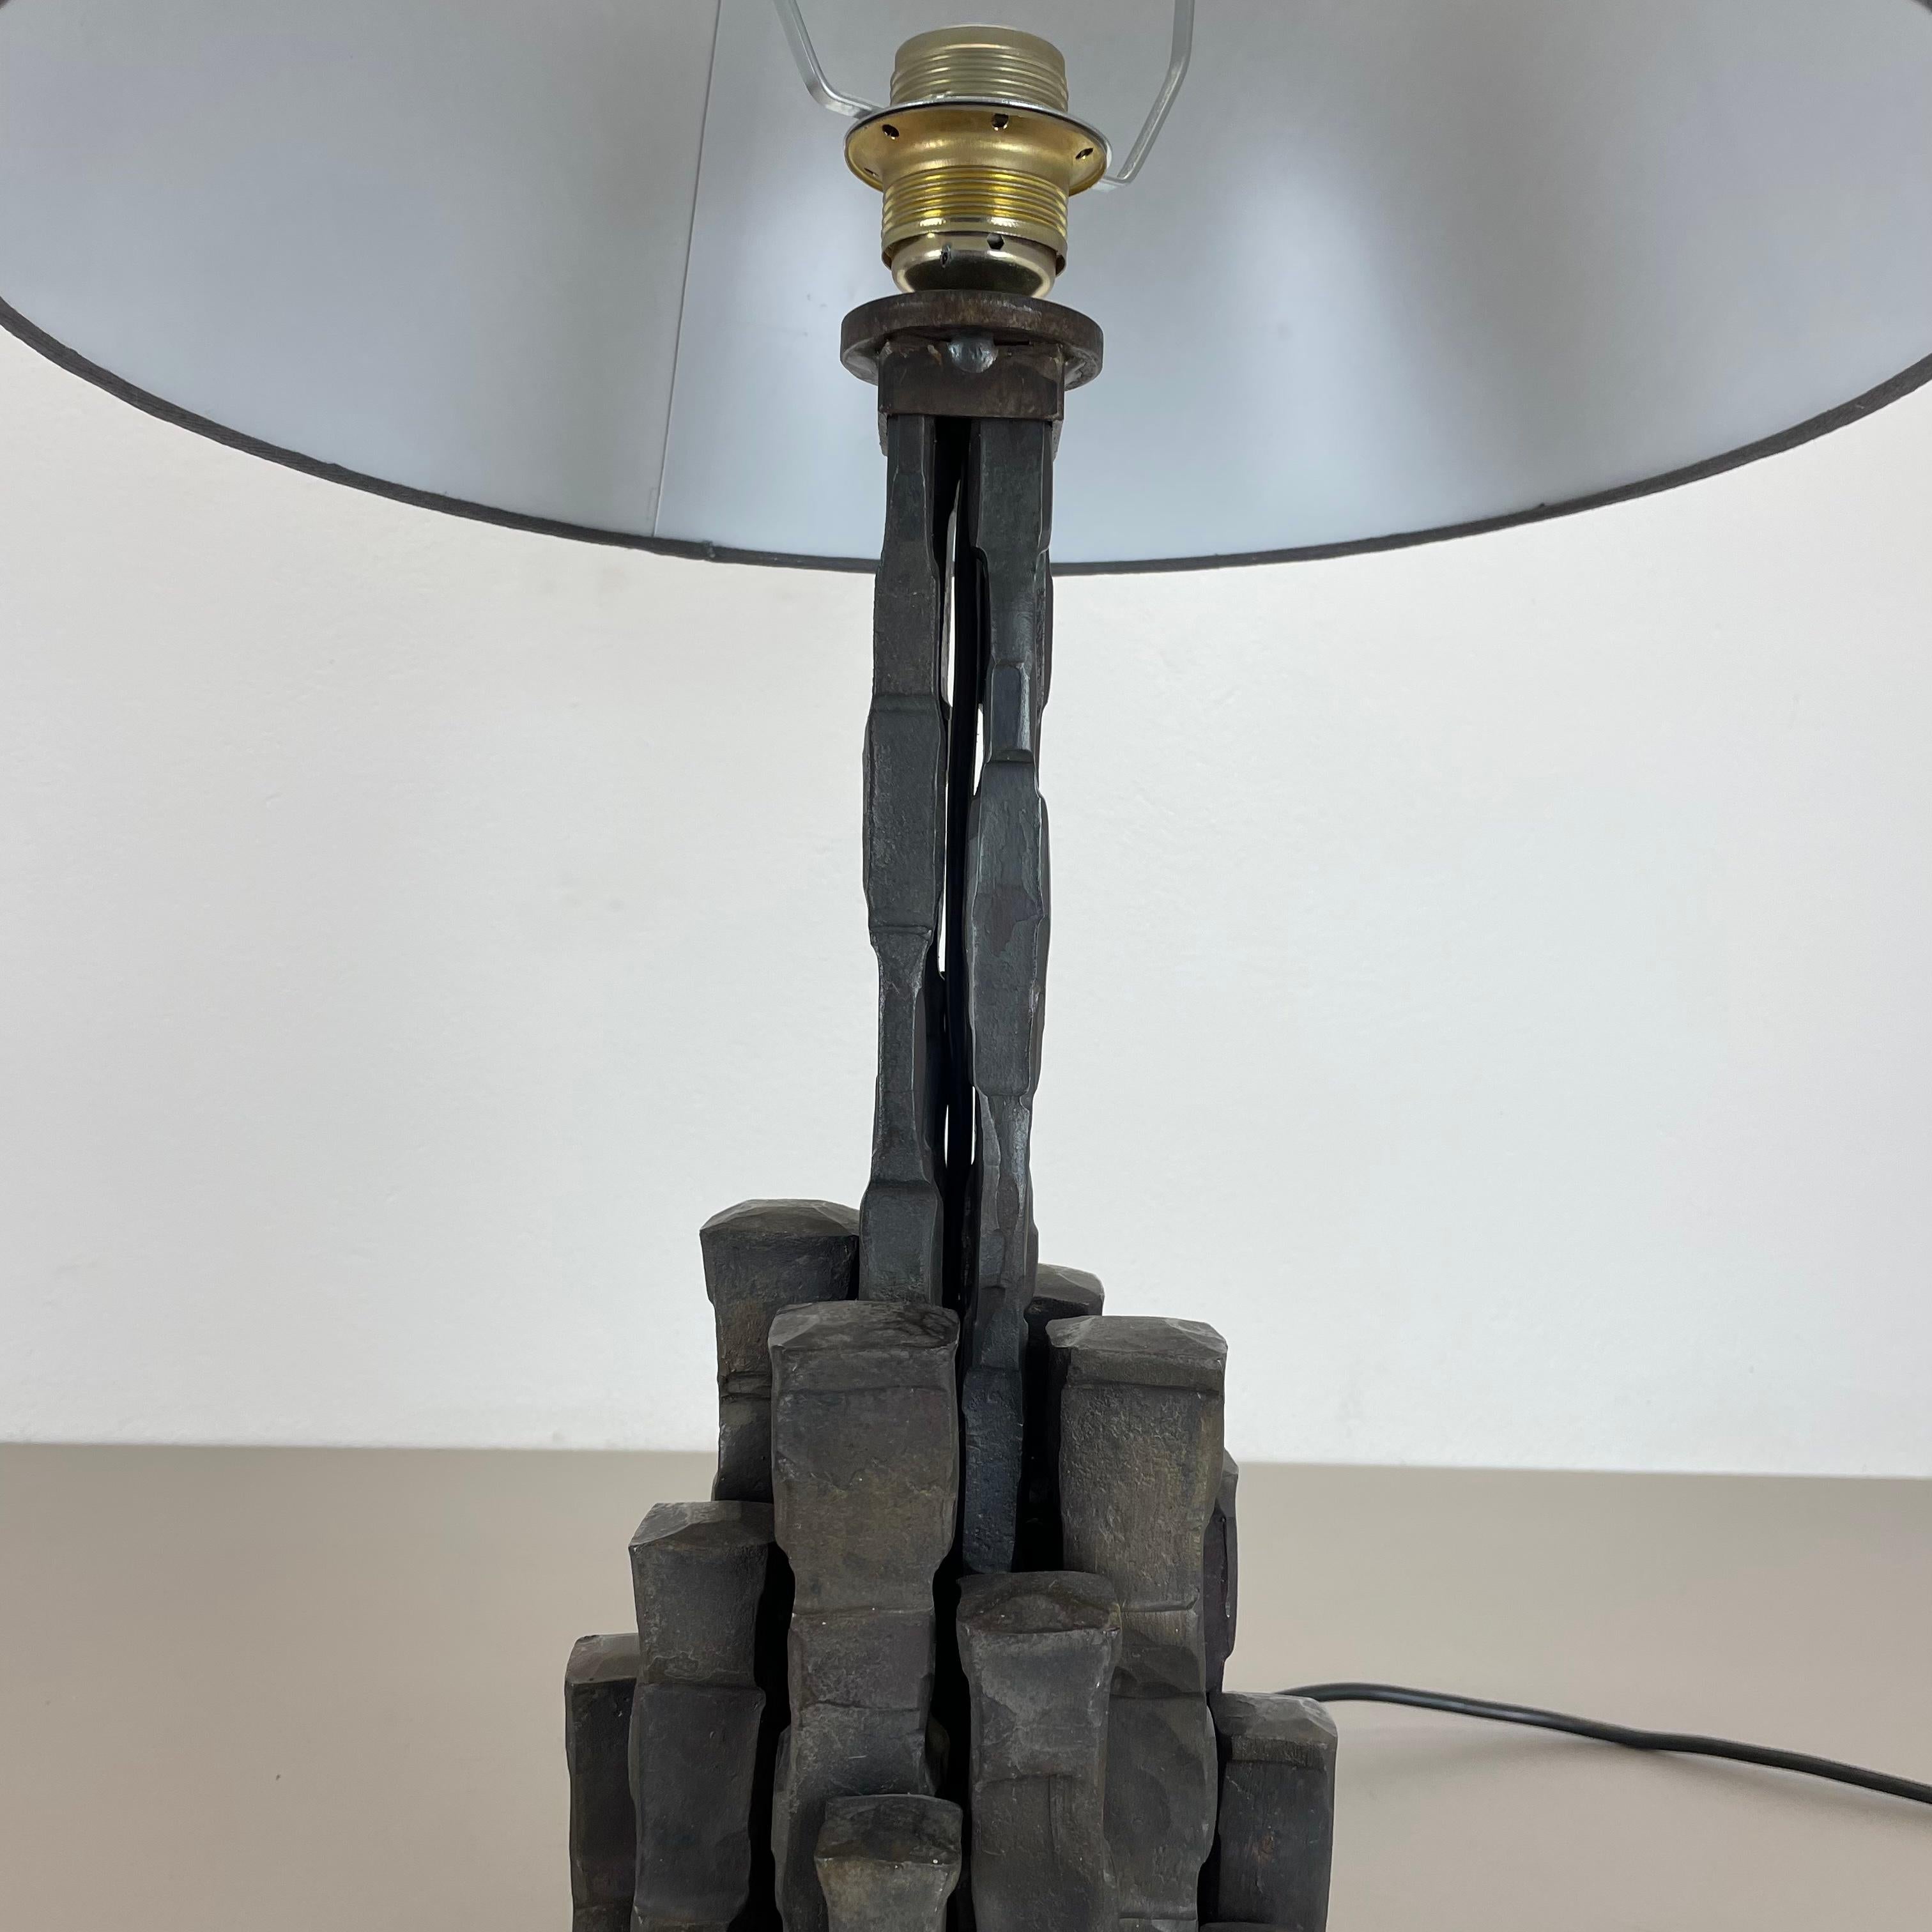 Article: Brutalist cast iron table light

Origin: Germany

Producer and designer: Lothar Kute attrib.

Material: cast iron

Decade: 1970s

Description: This original vintage brutalist table light, was produced in the 1970s in Germany. It